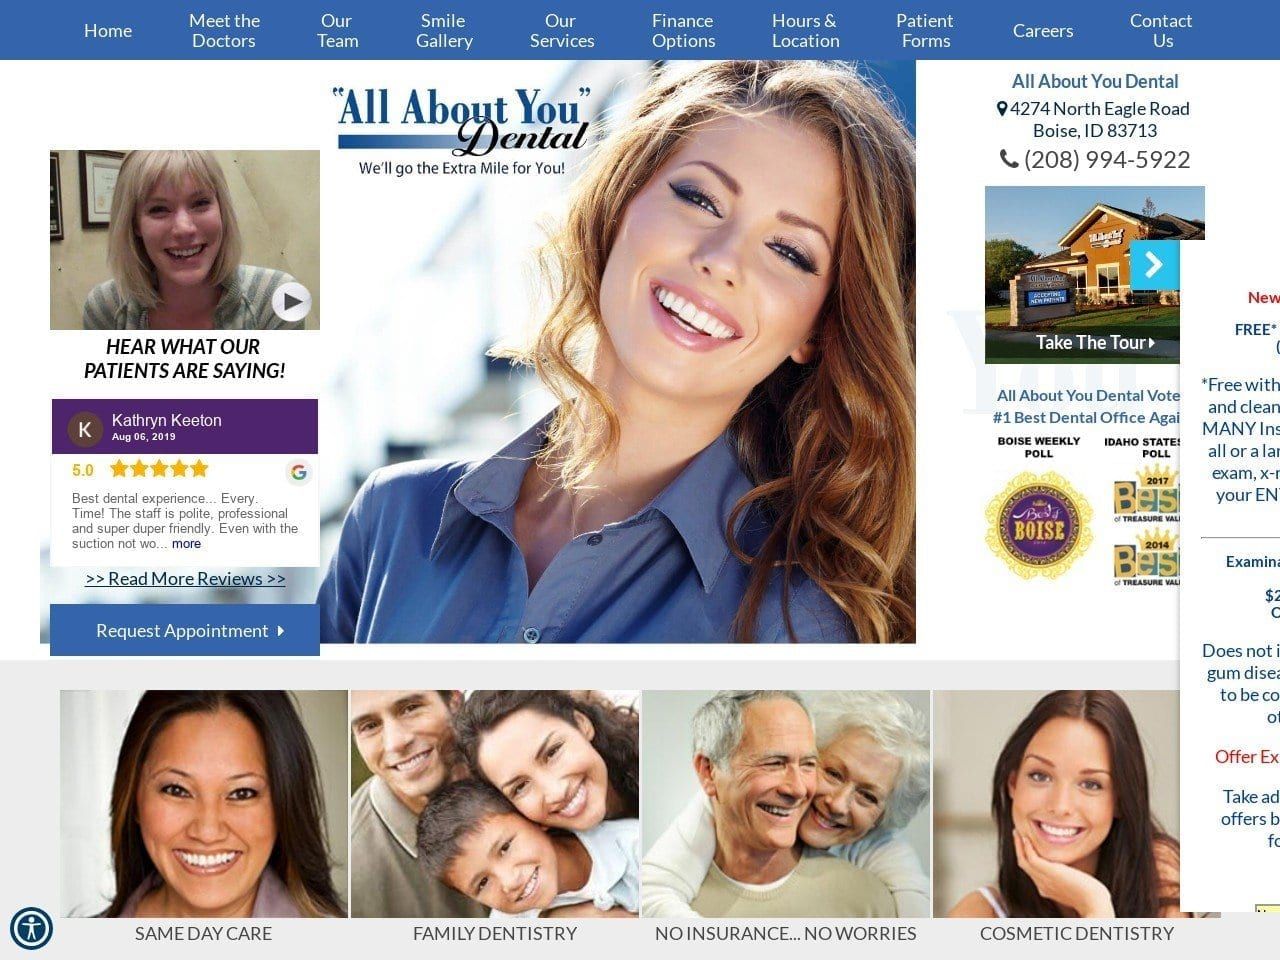 All About You Dental Website Screenshot from allaboutyoudental.com